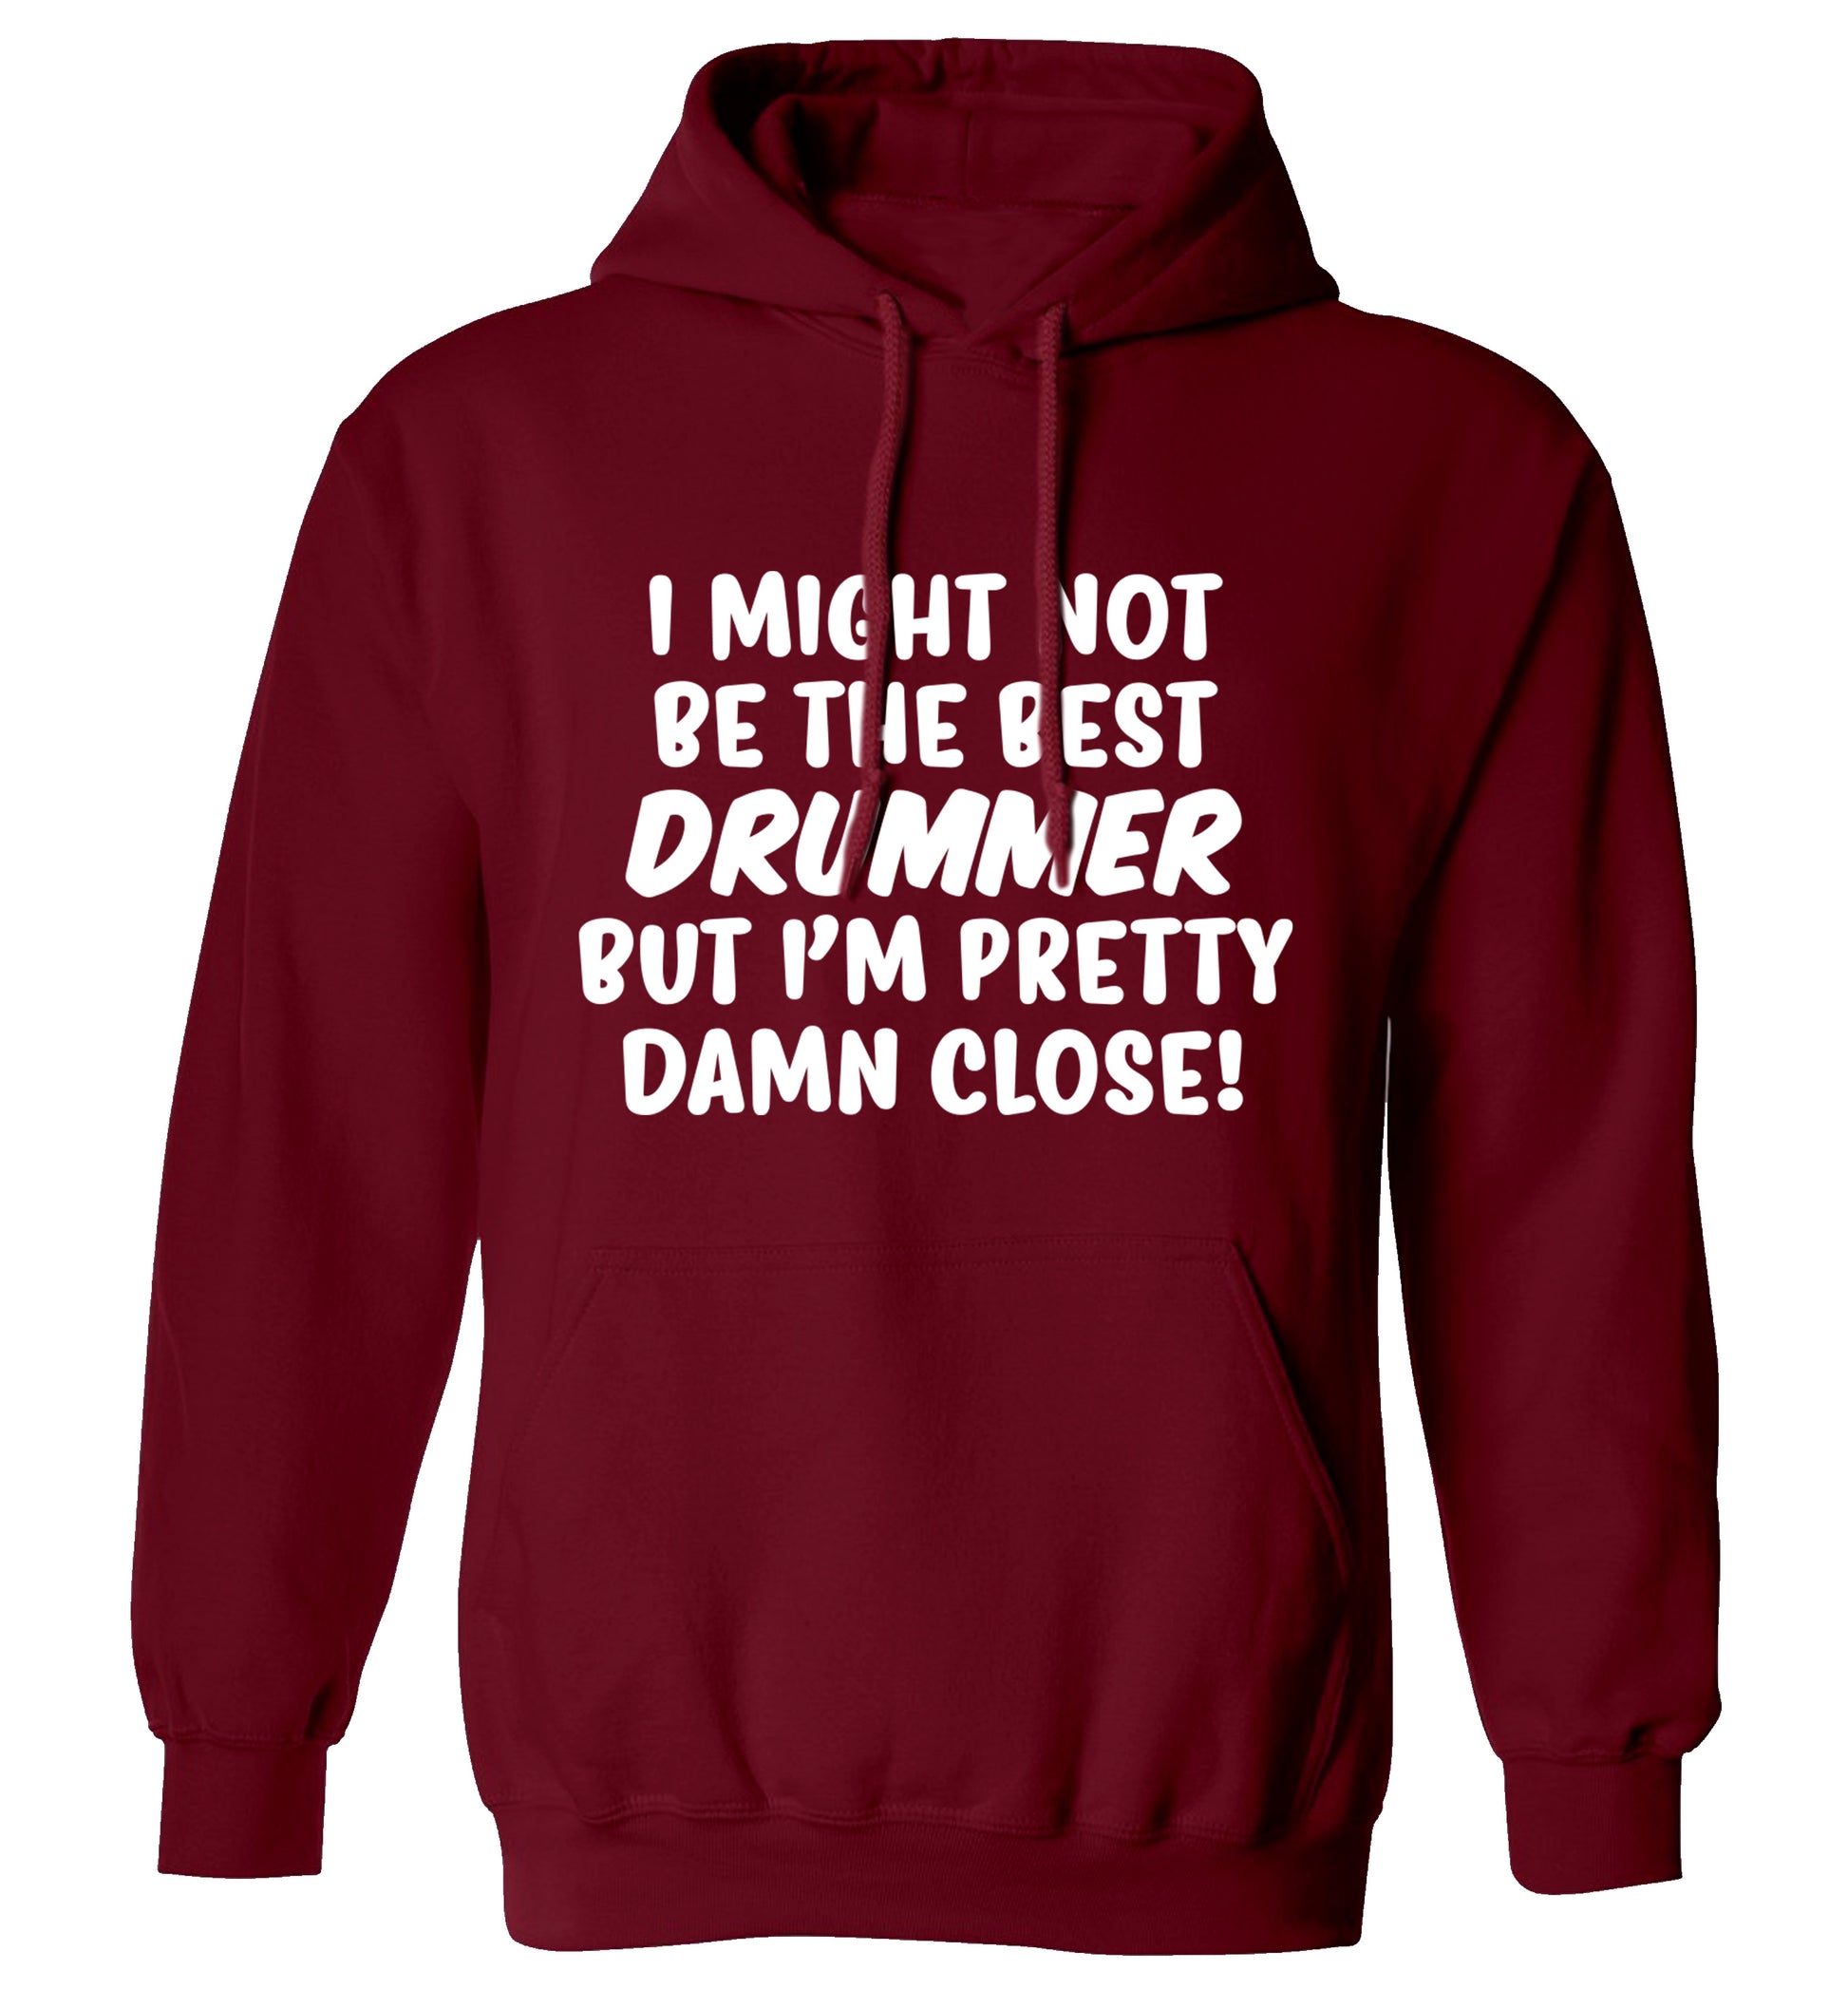 I might not be the best drummer but I'm pretty close! adults unisexmaroon hoodie 2XL